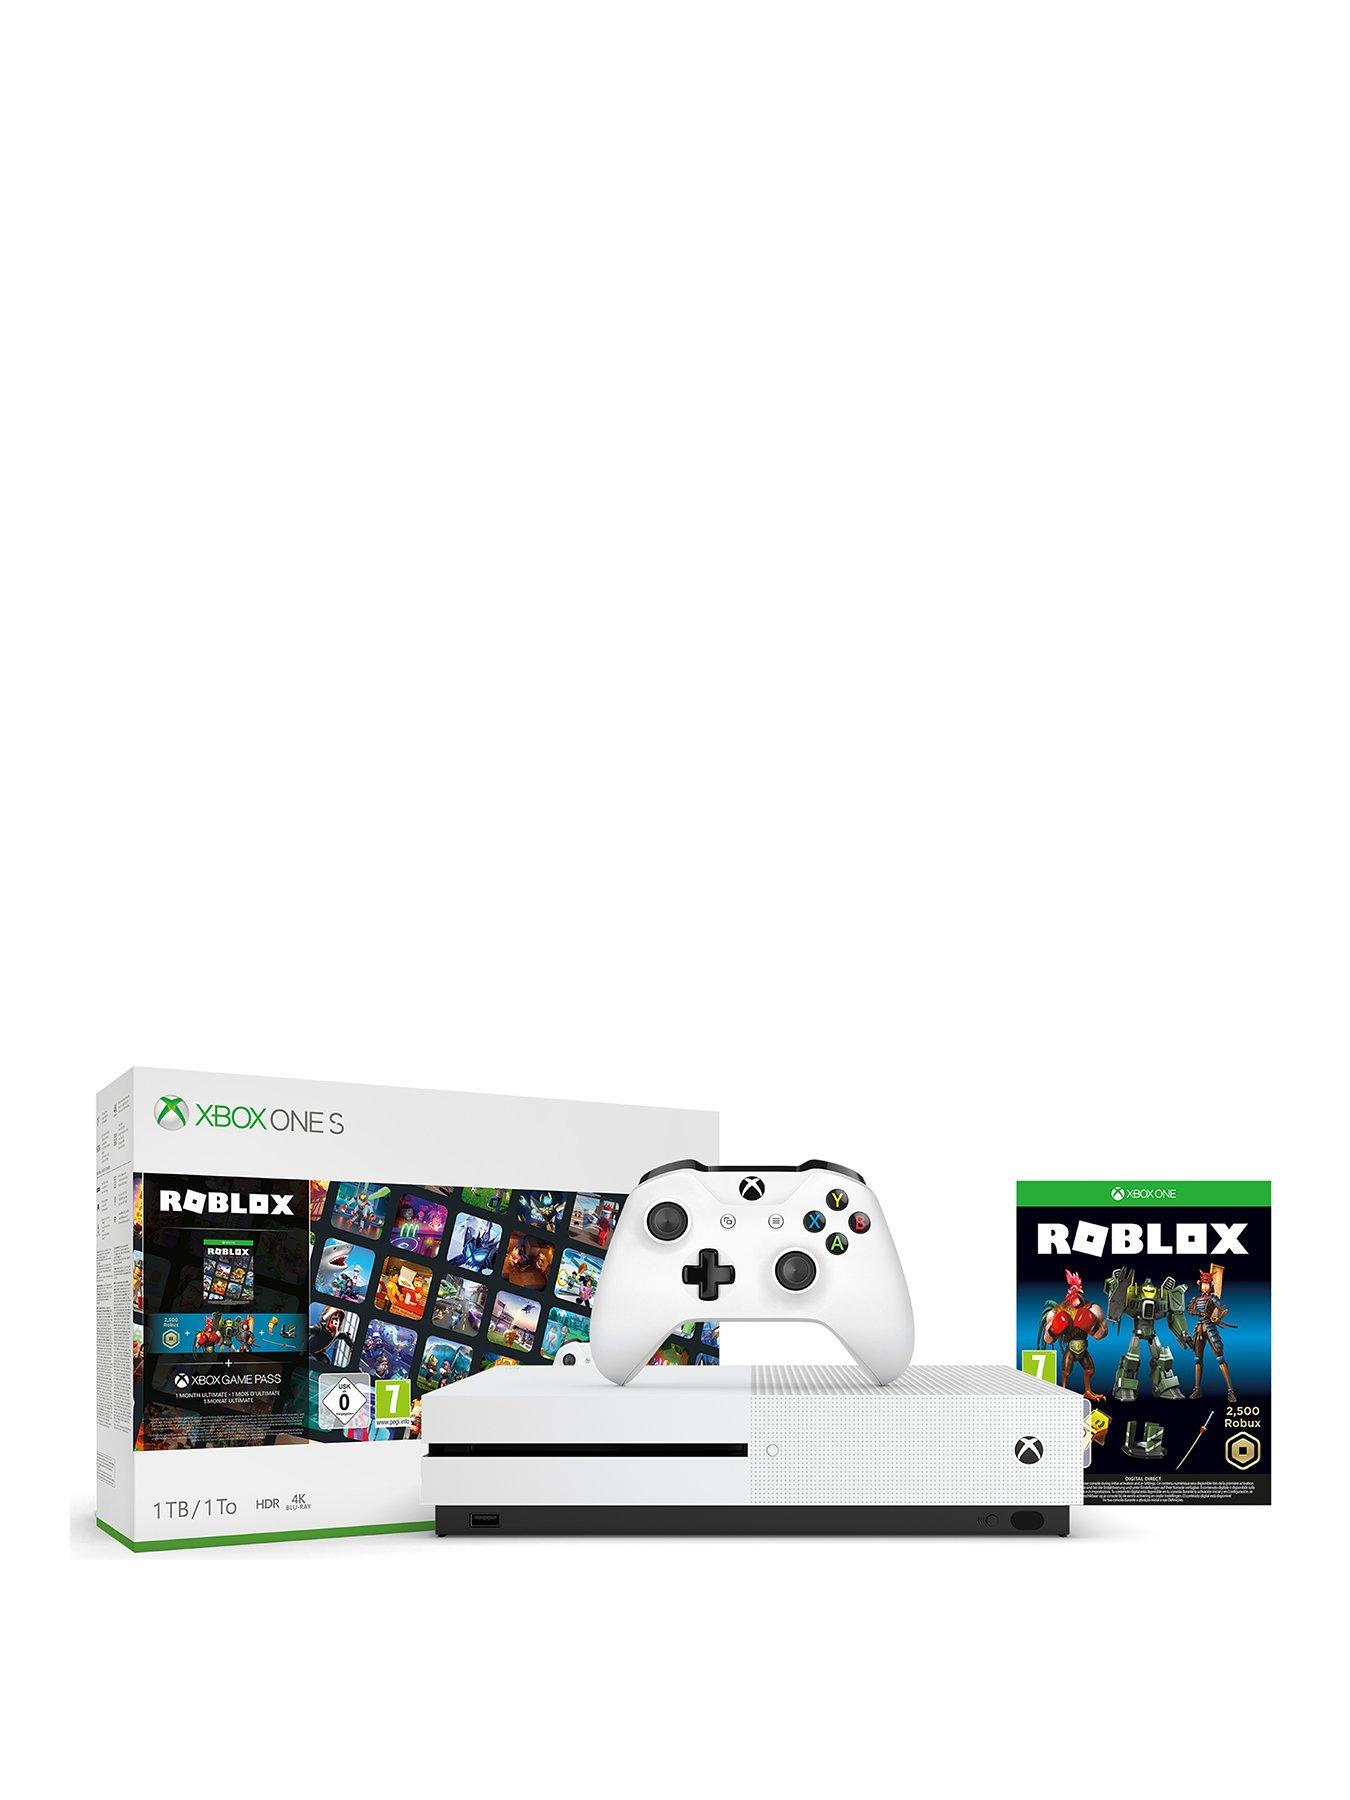 Xbox One S With Roblox Bundle And Optional Extras 1tb Console White Very Co Uk - roblox for nintendo 3ds xl